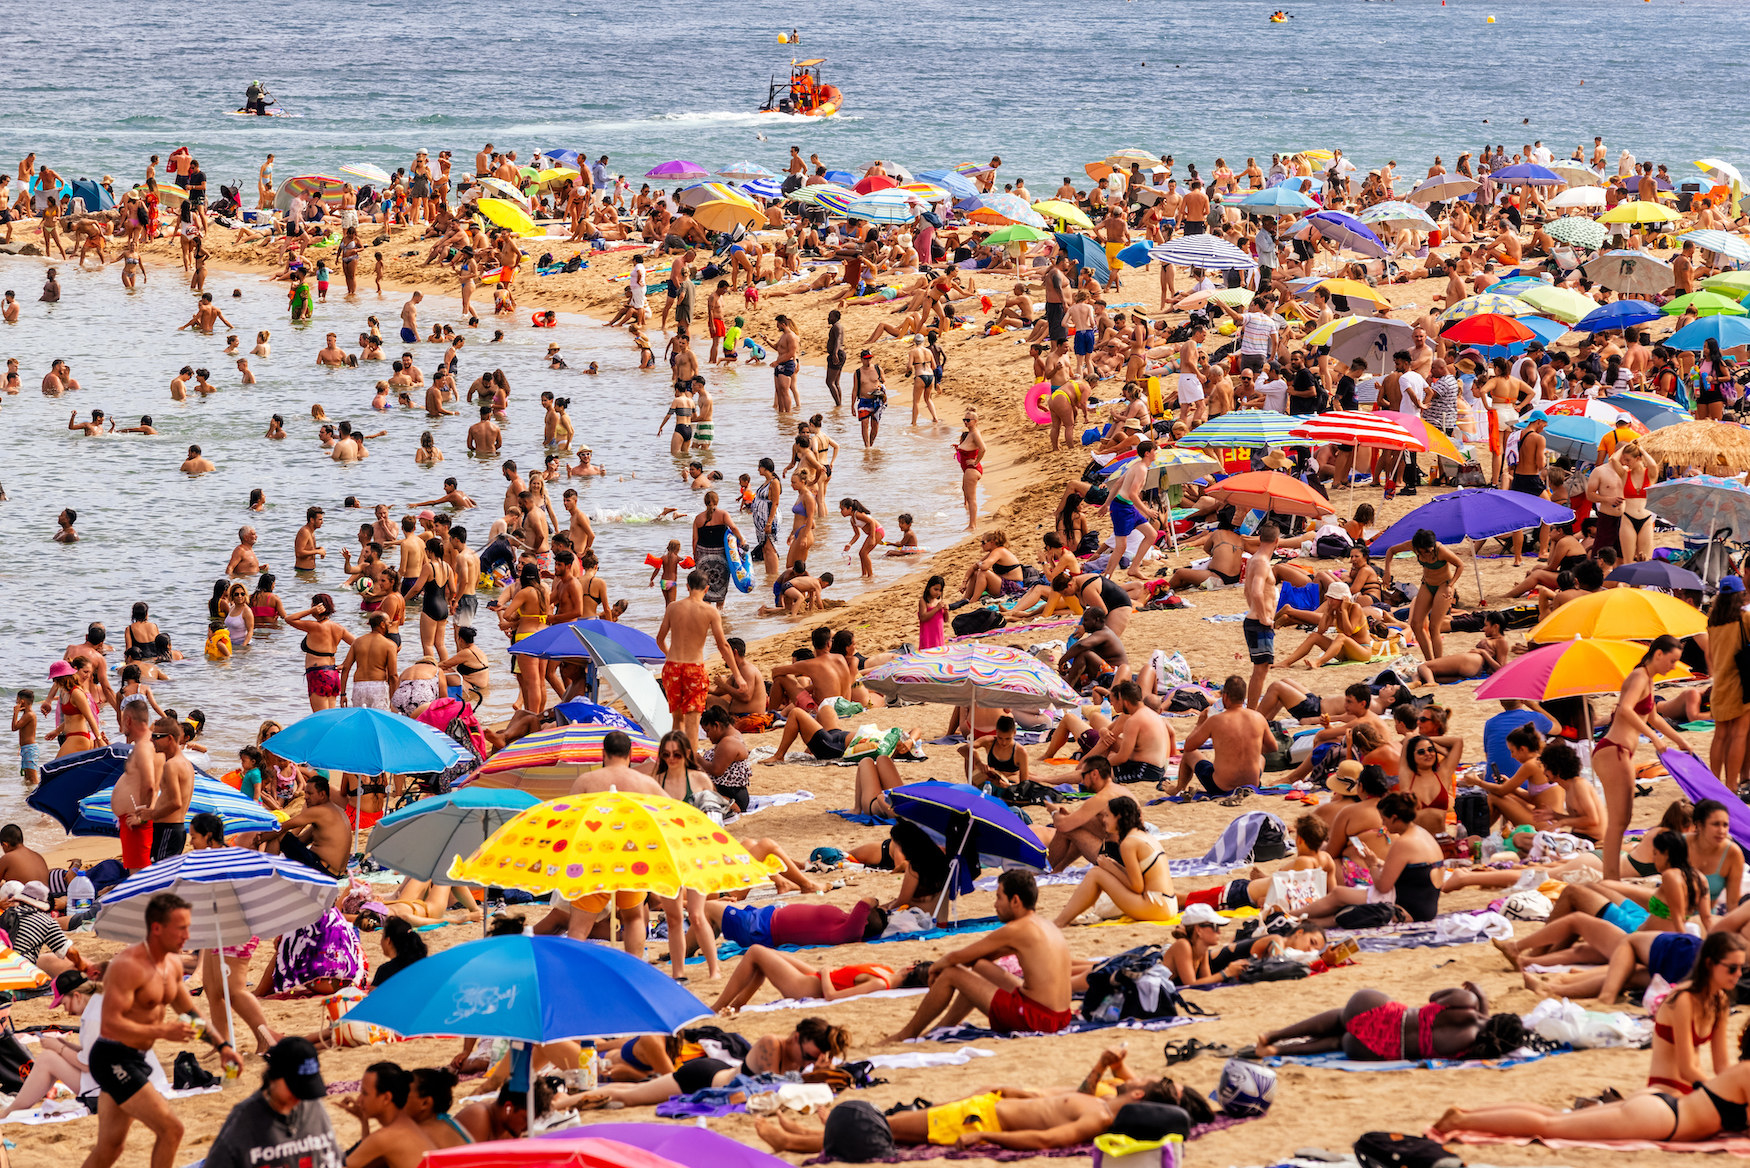 A large crowd on a beach